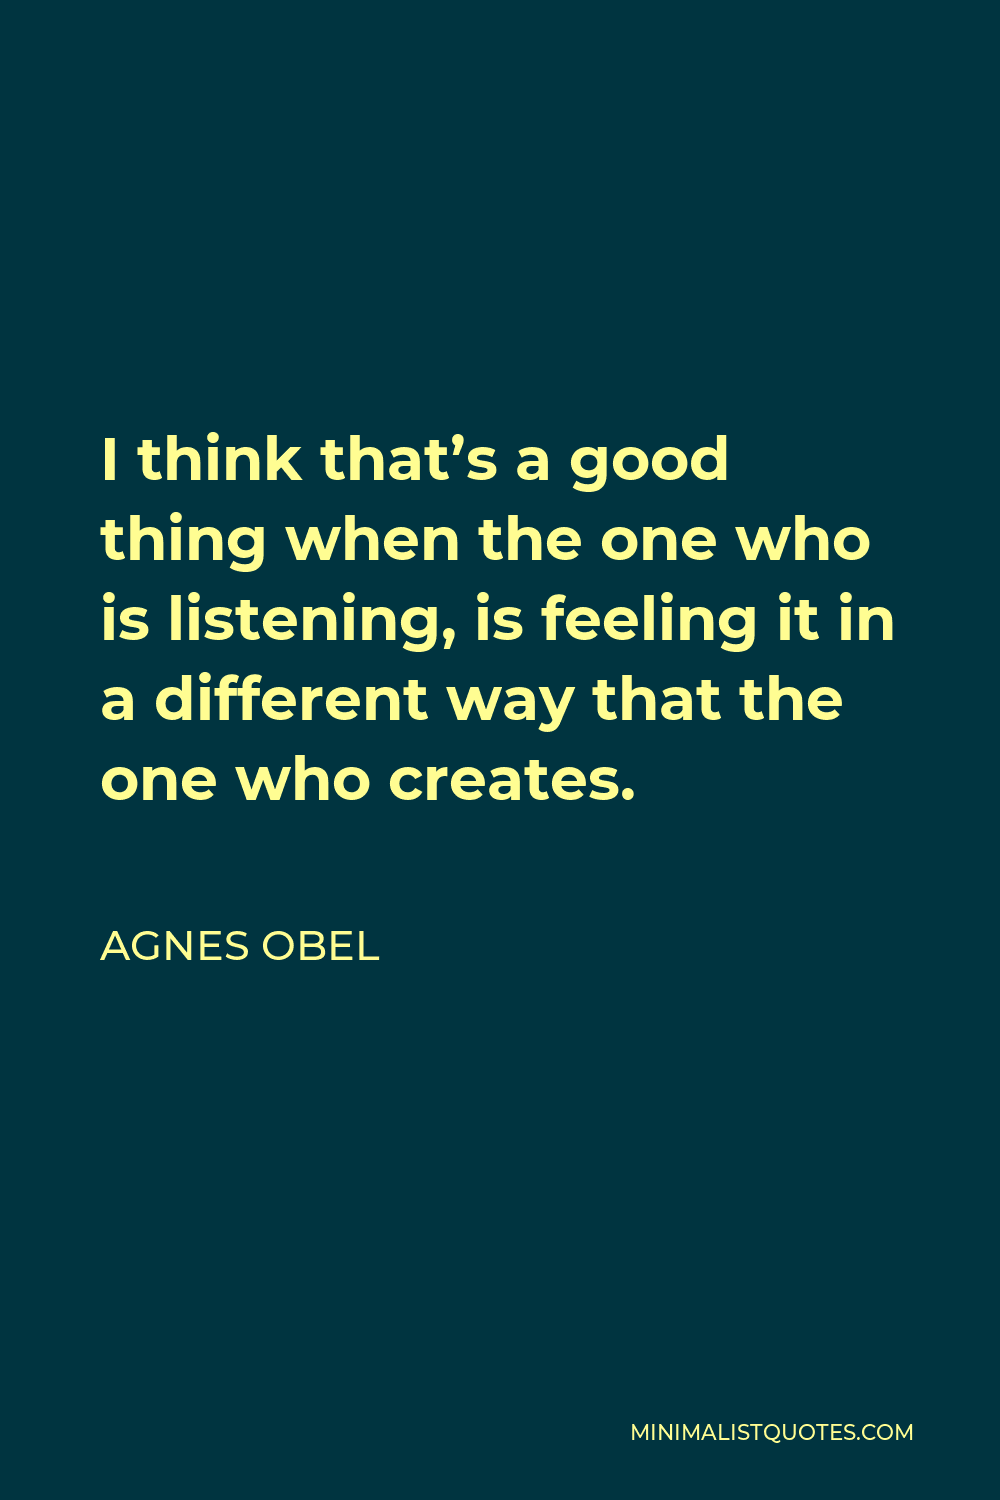 Agnes Obel Quote - I think that’s a good thing when the one who is listening, is feeling it in a different way that the one who creates.